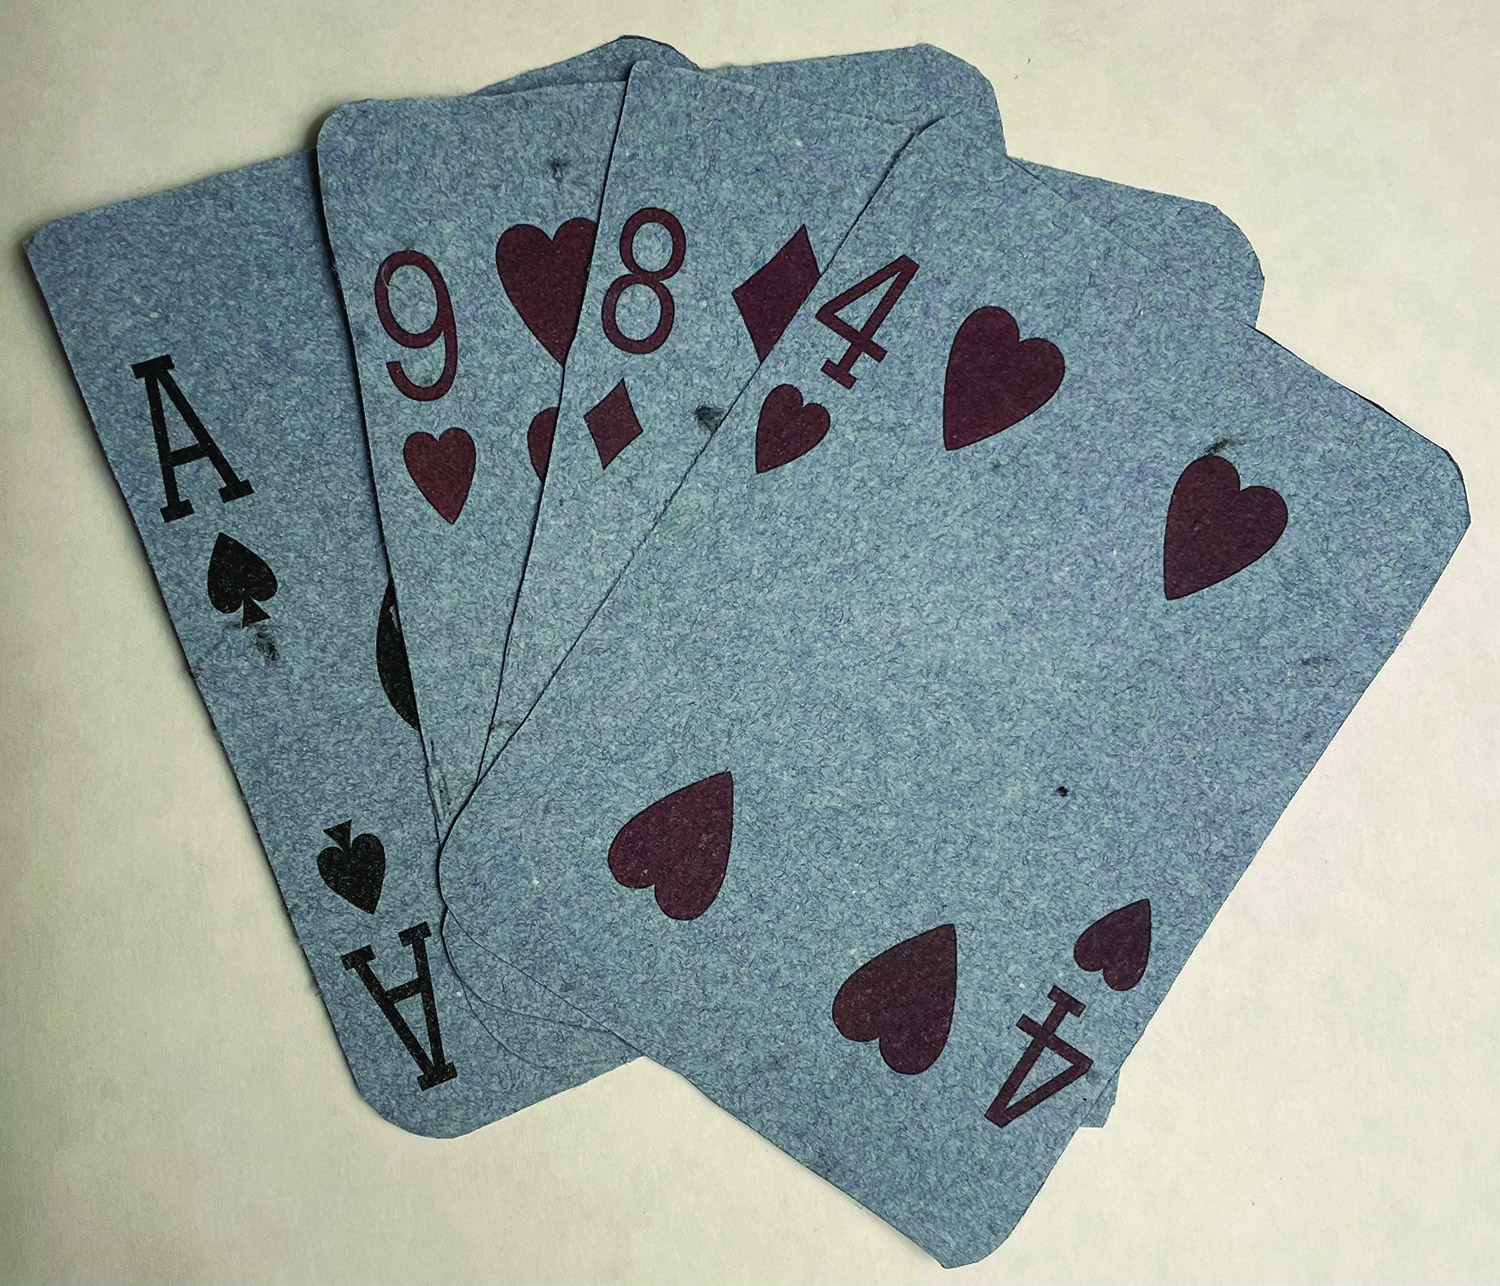 Four playing cards made from handmade paper consisting of pulp made from blue button-down shirts. The cards are fanned out, with a red four of hearts in the forefront. It is followed by a red eight of diamonds, a red nine of hearts, and a black ace of spades as the final card. The pulp texture from the handmade paper is present on the surface of each card. They are placed against a beige background.